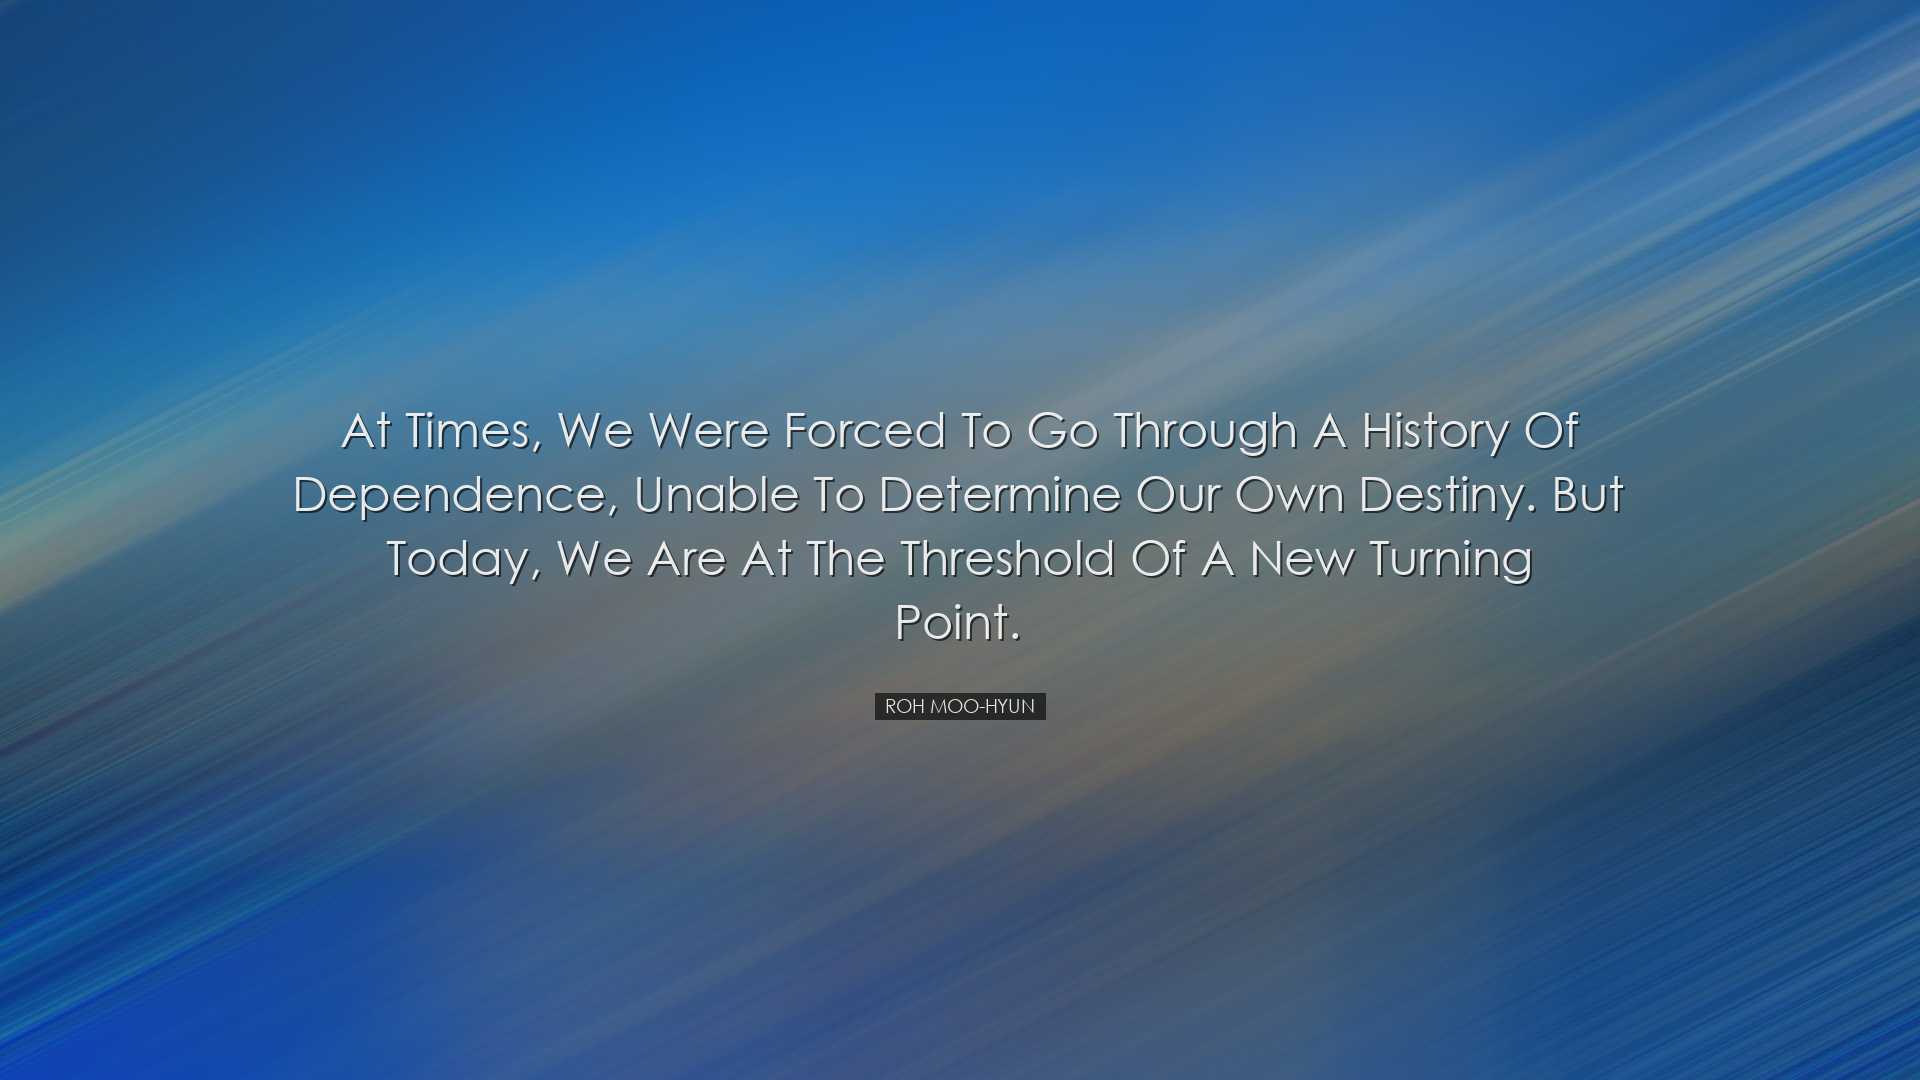 At times, we were forced to go through a history of dependence, un